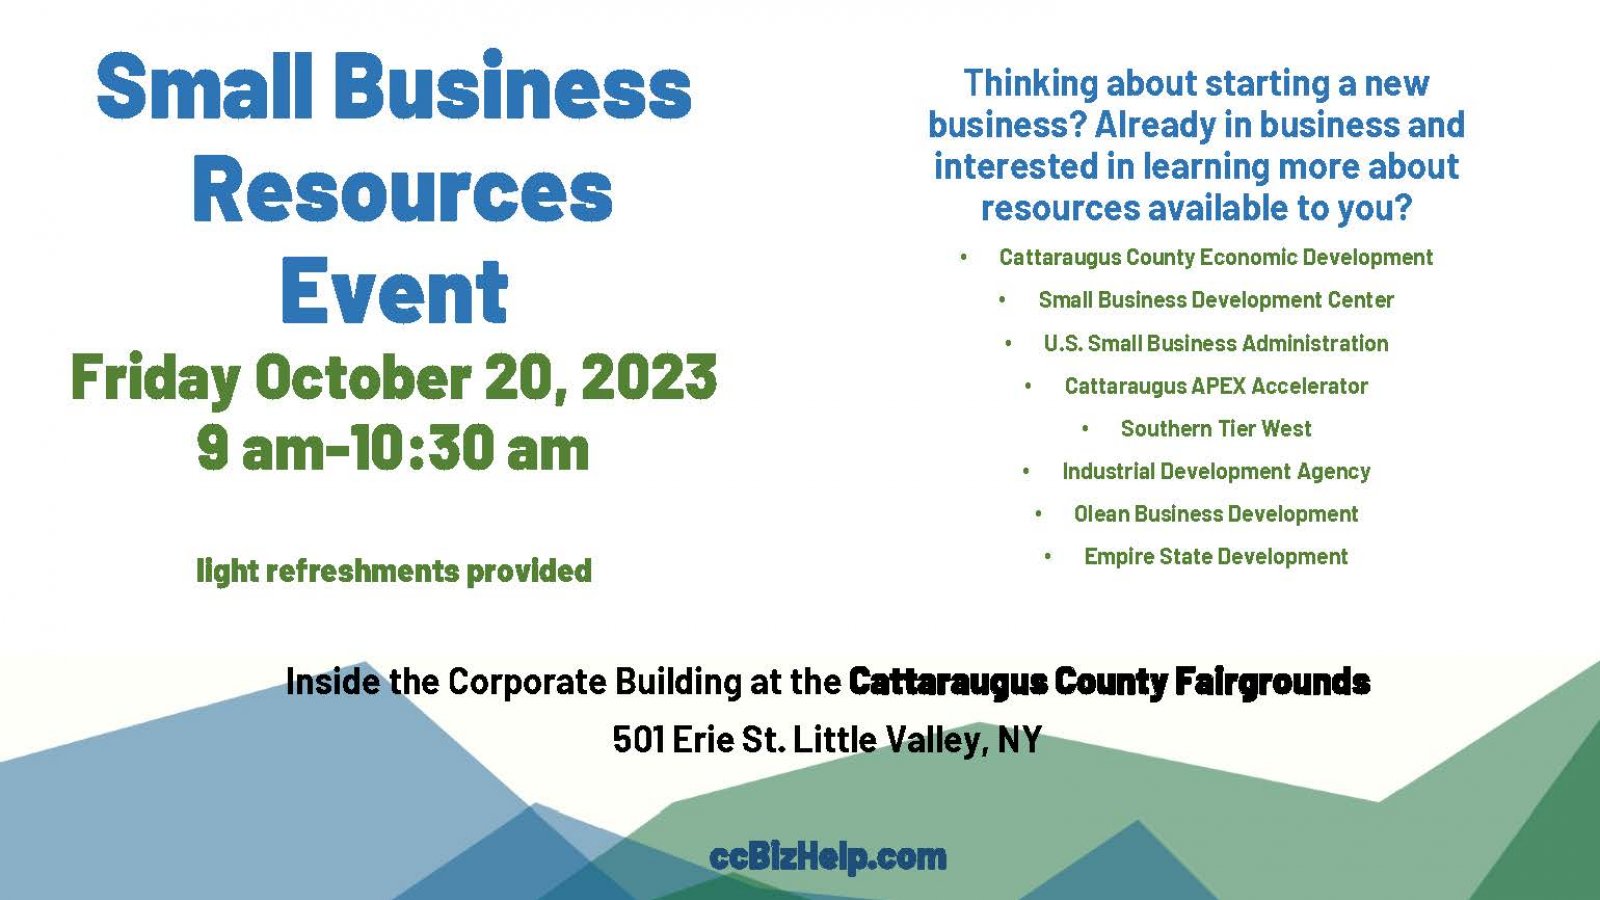 Small Business Resources Event